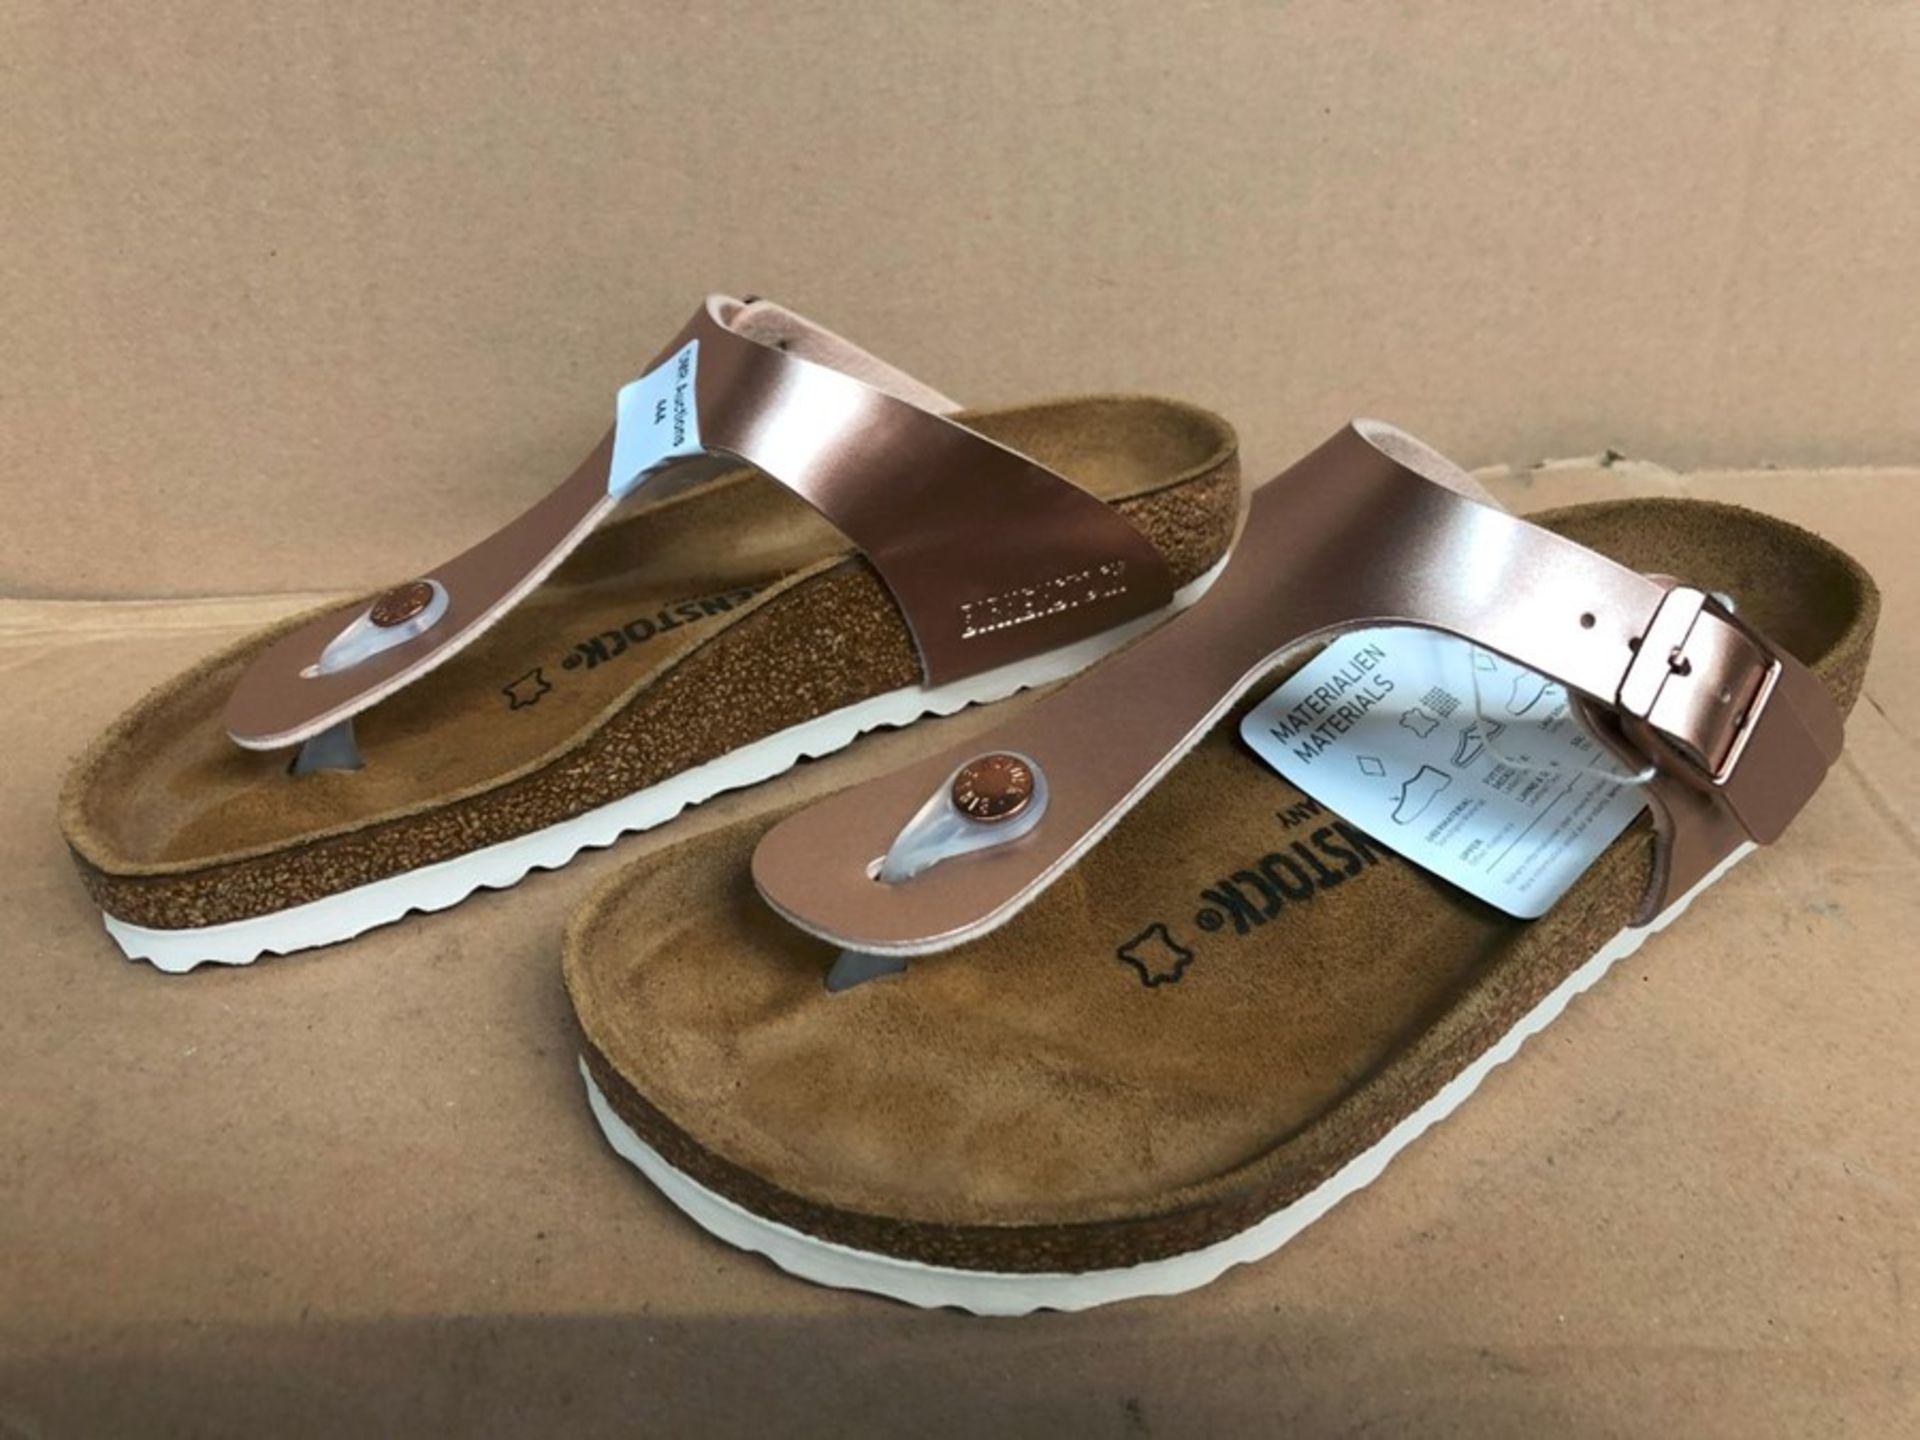 1 PAIR OF GIZEH FAUX LEATHER FLIP FLOPS / SIZE: 37 / RRP £60.00